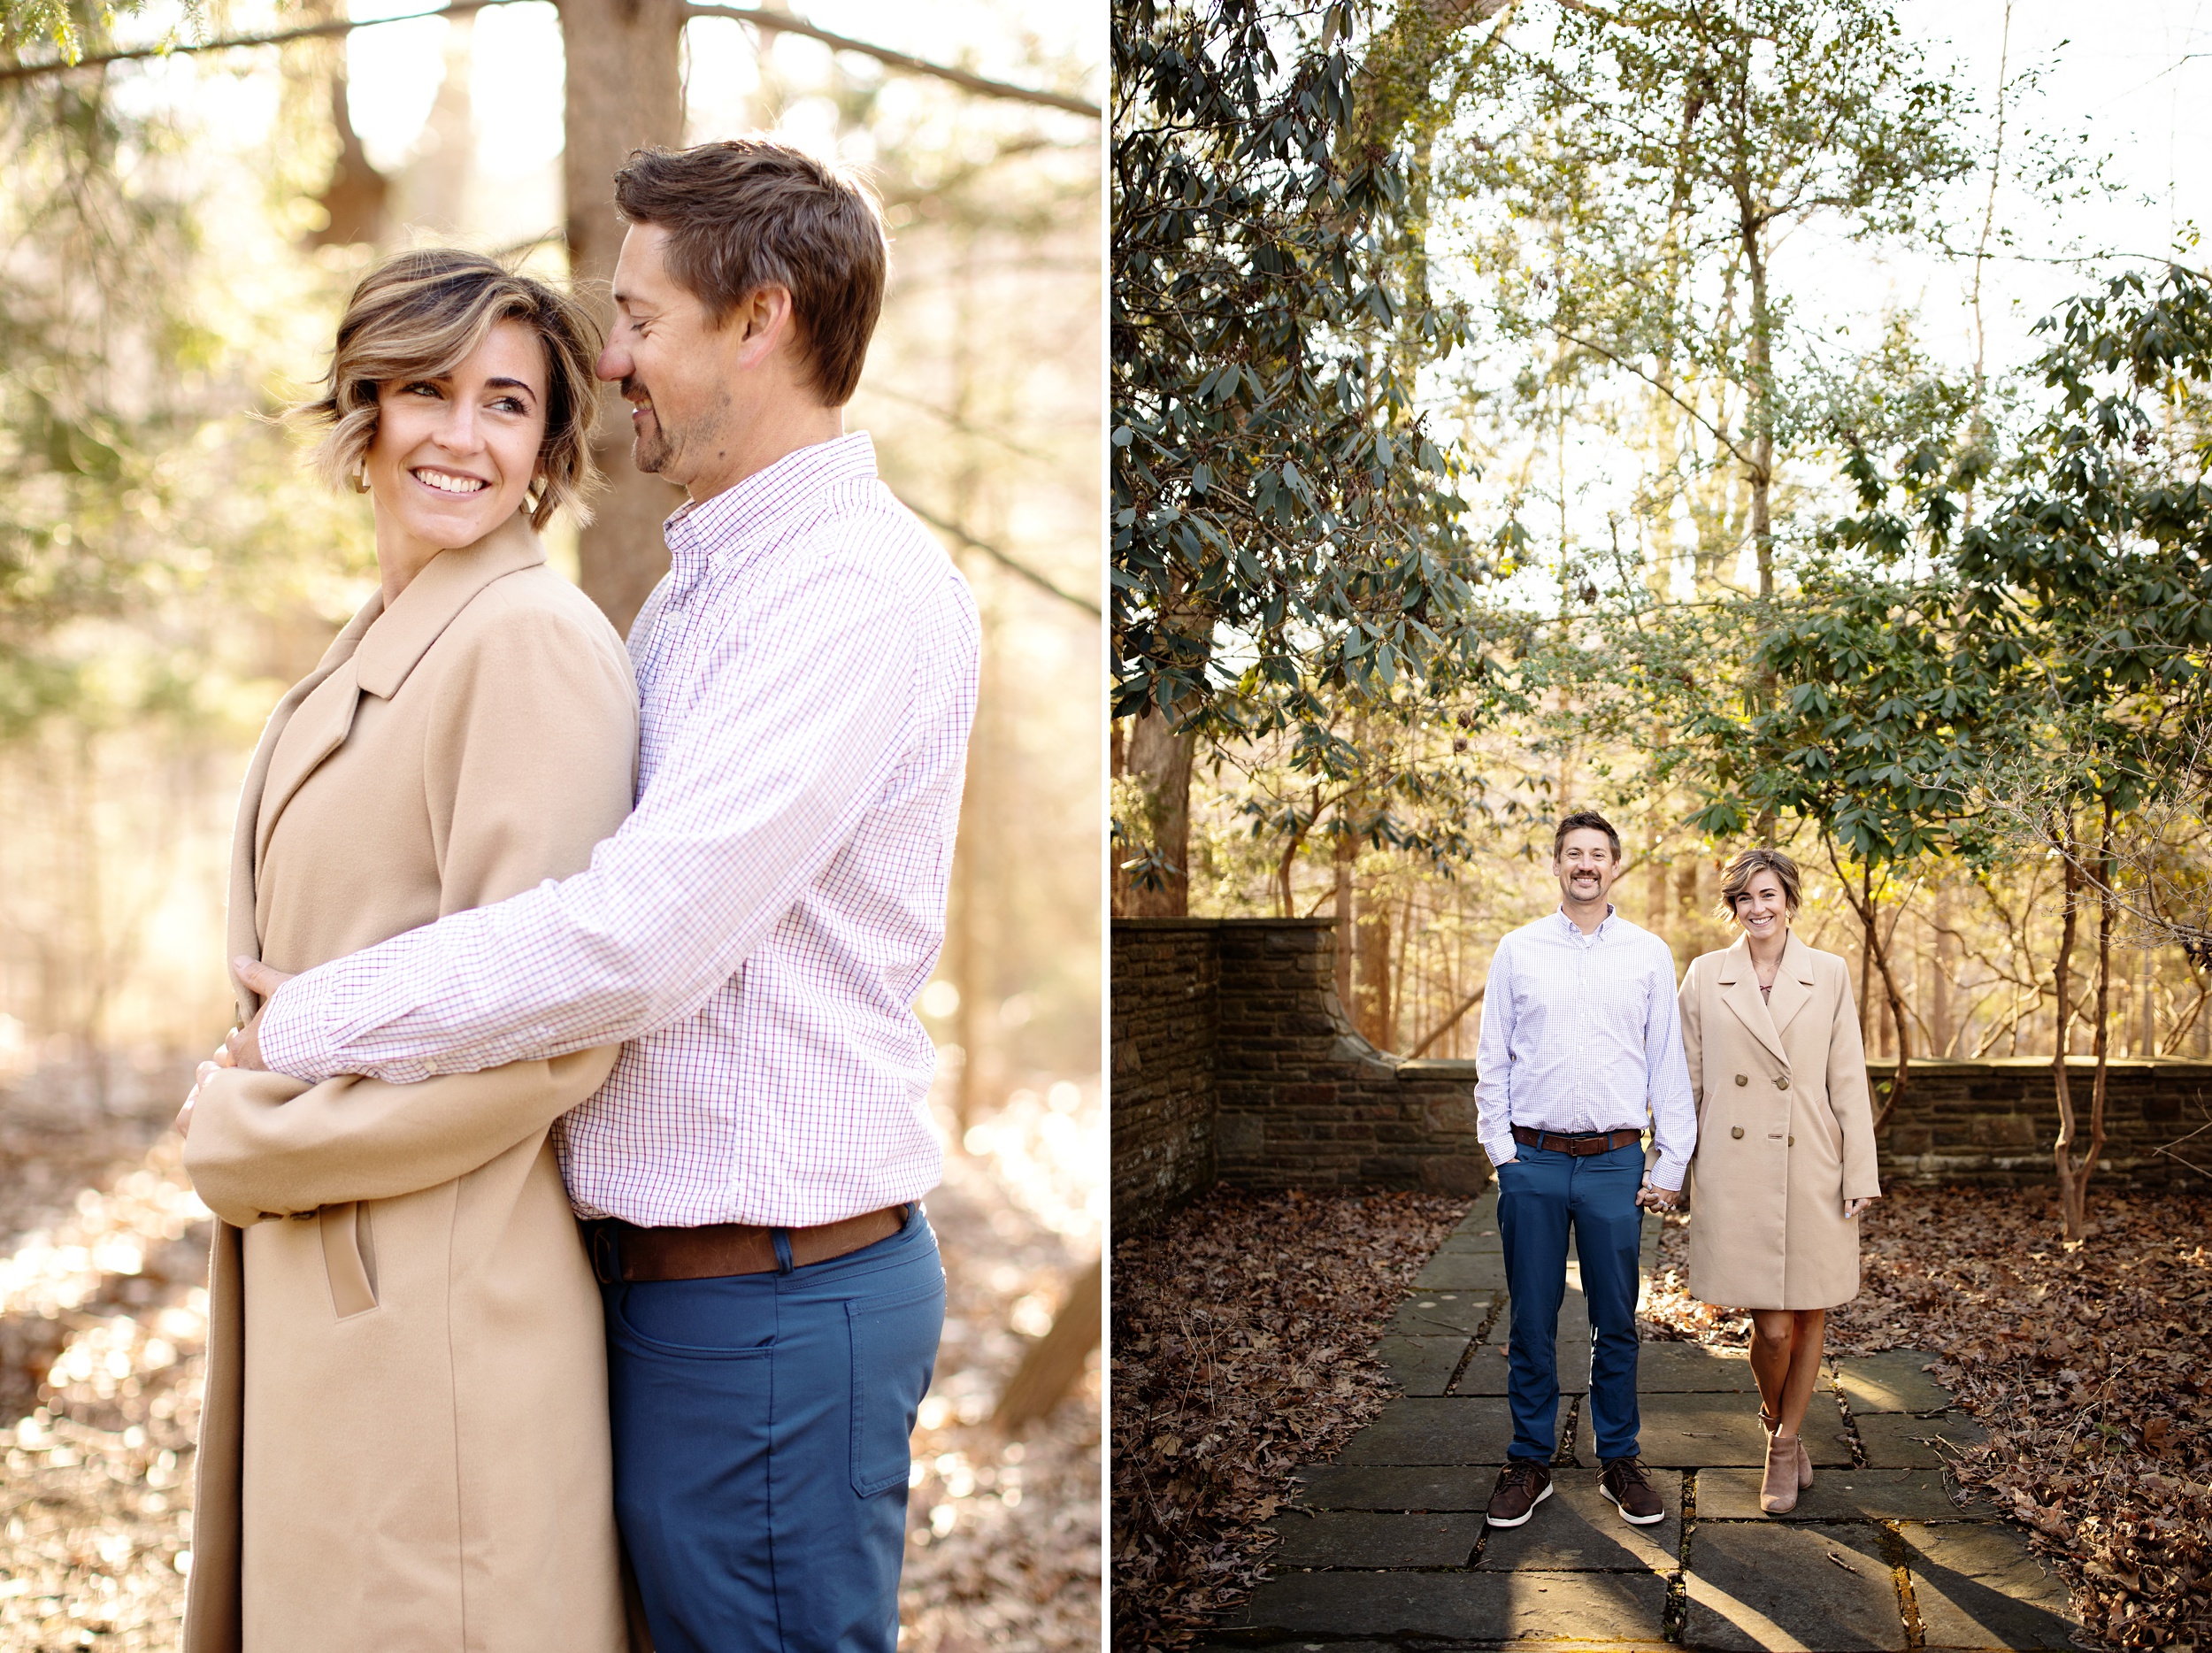 Nolde Forest Engagement and Wedding Photos, Reading, Pa Wedding and Engagement Photographer